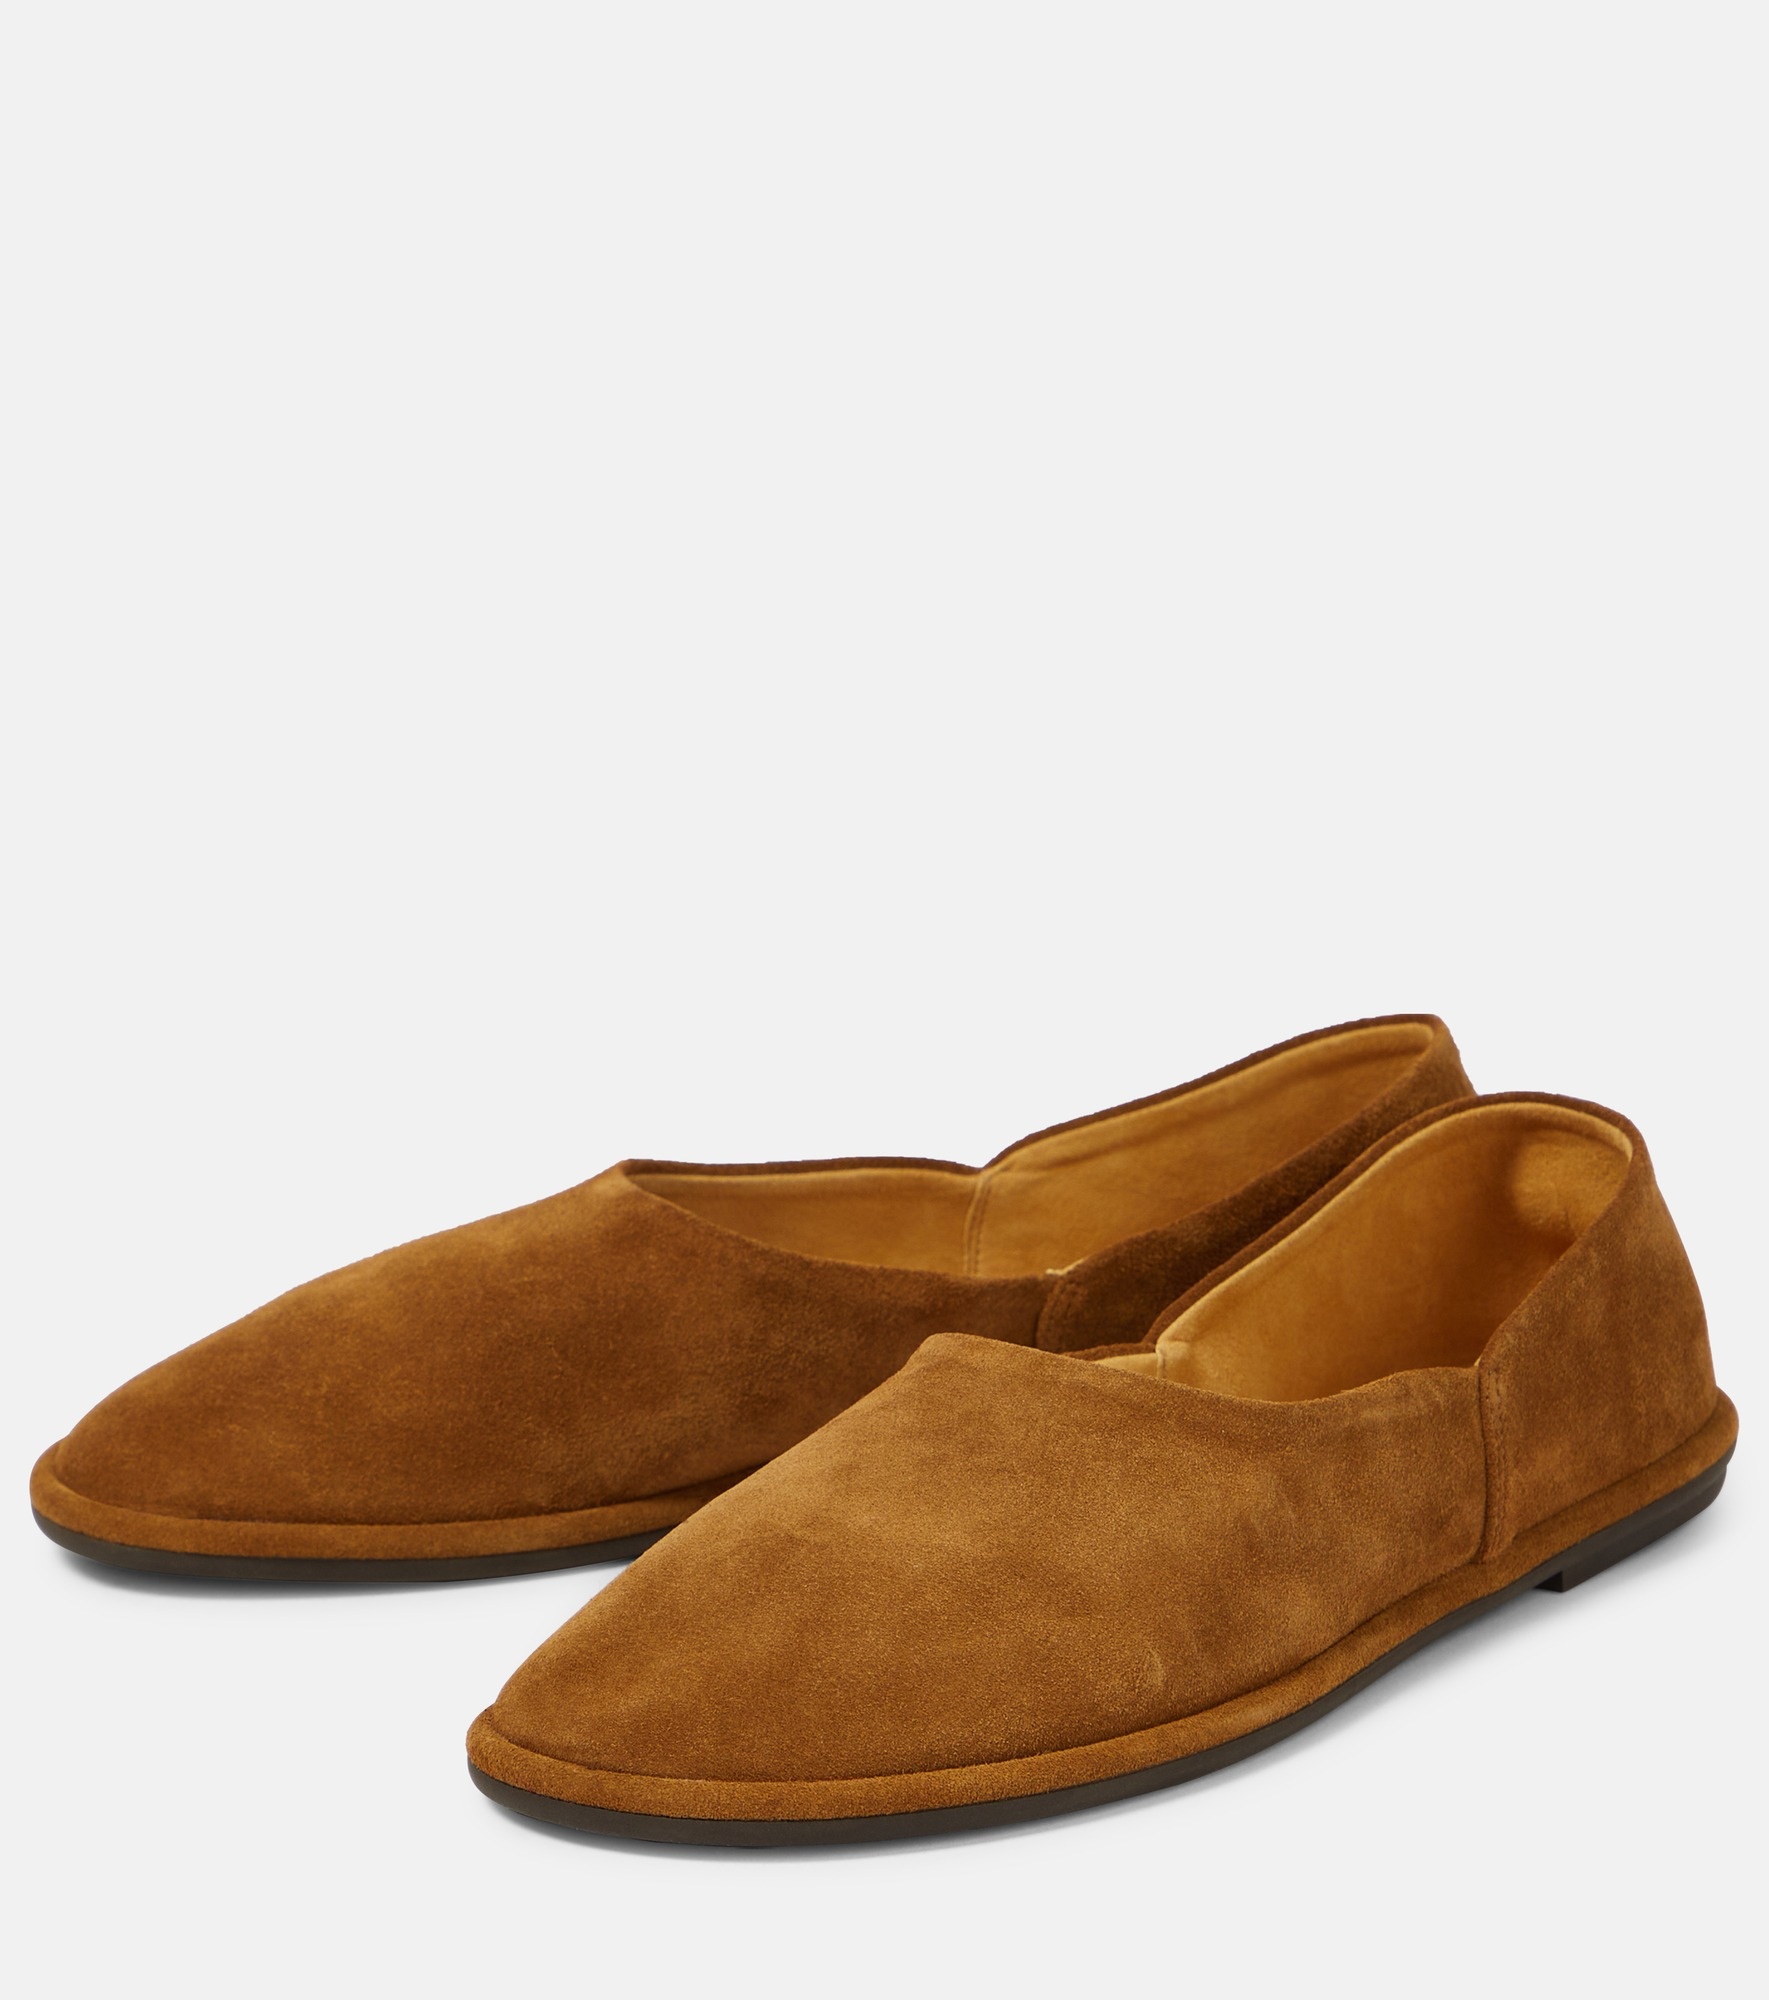 Canal suede loafers - 5